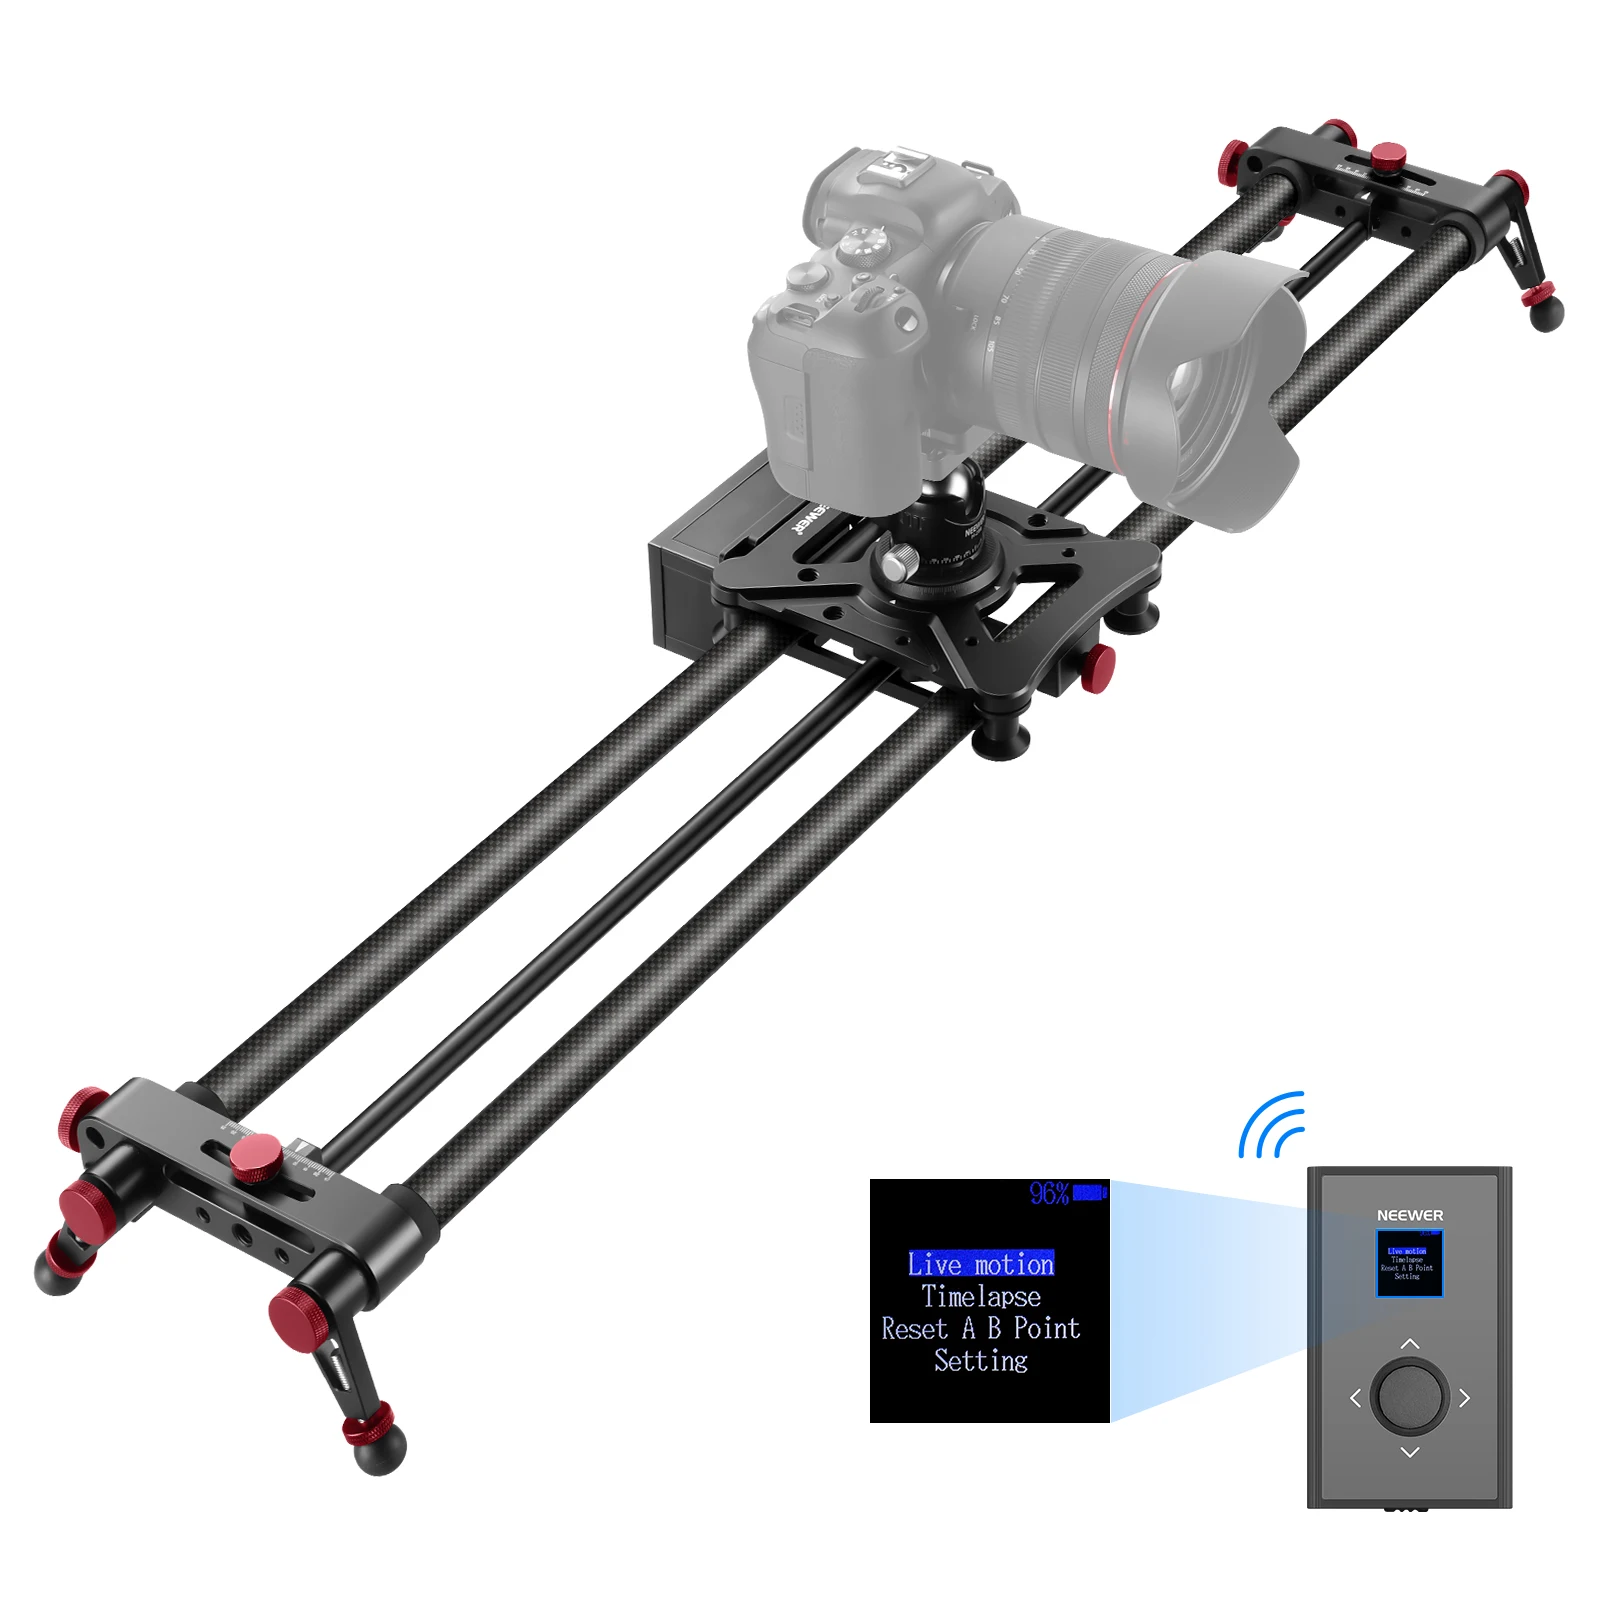 Neewer Camera Slider Aluminum Alloy Dolly Rail Load up to 12 pounds/5.44 kilograms 19.7 inches/ 50 Centimeters with 4 Bearings for Smartphone Nikon Canon Sony Camera 